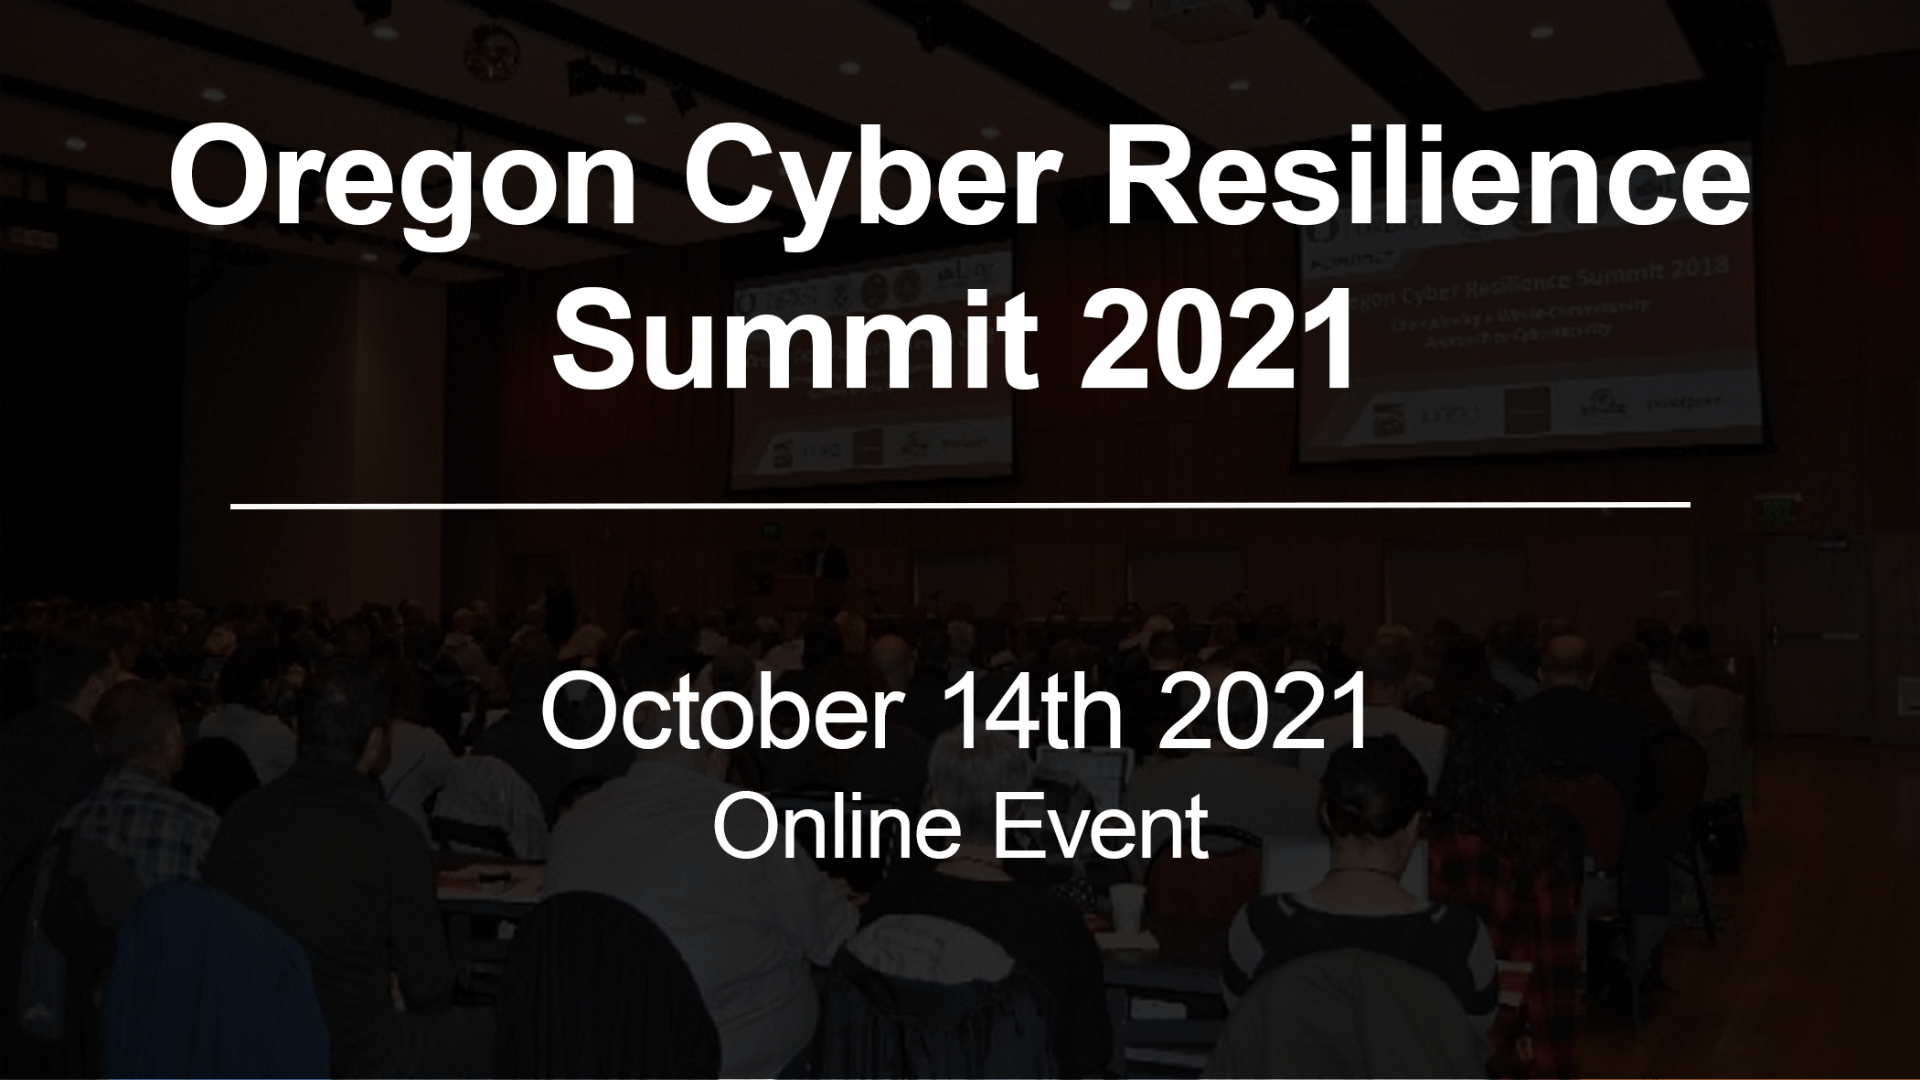 Oregon Cyber Resilience Summit 2021